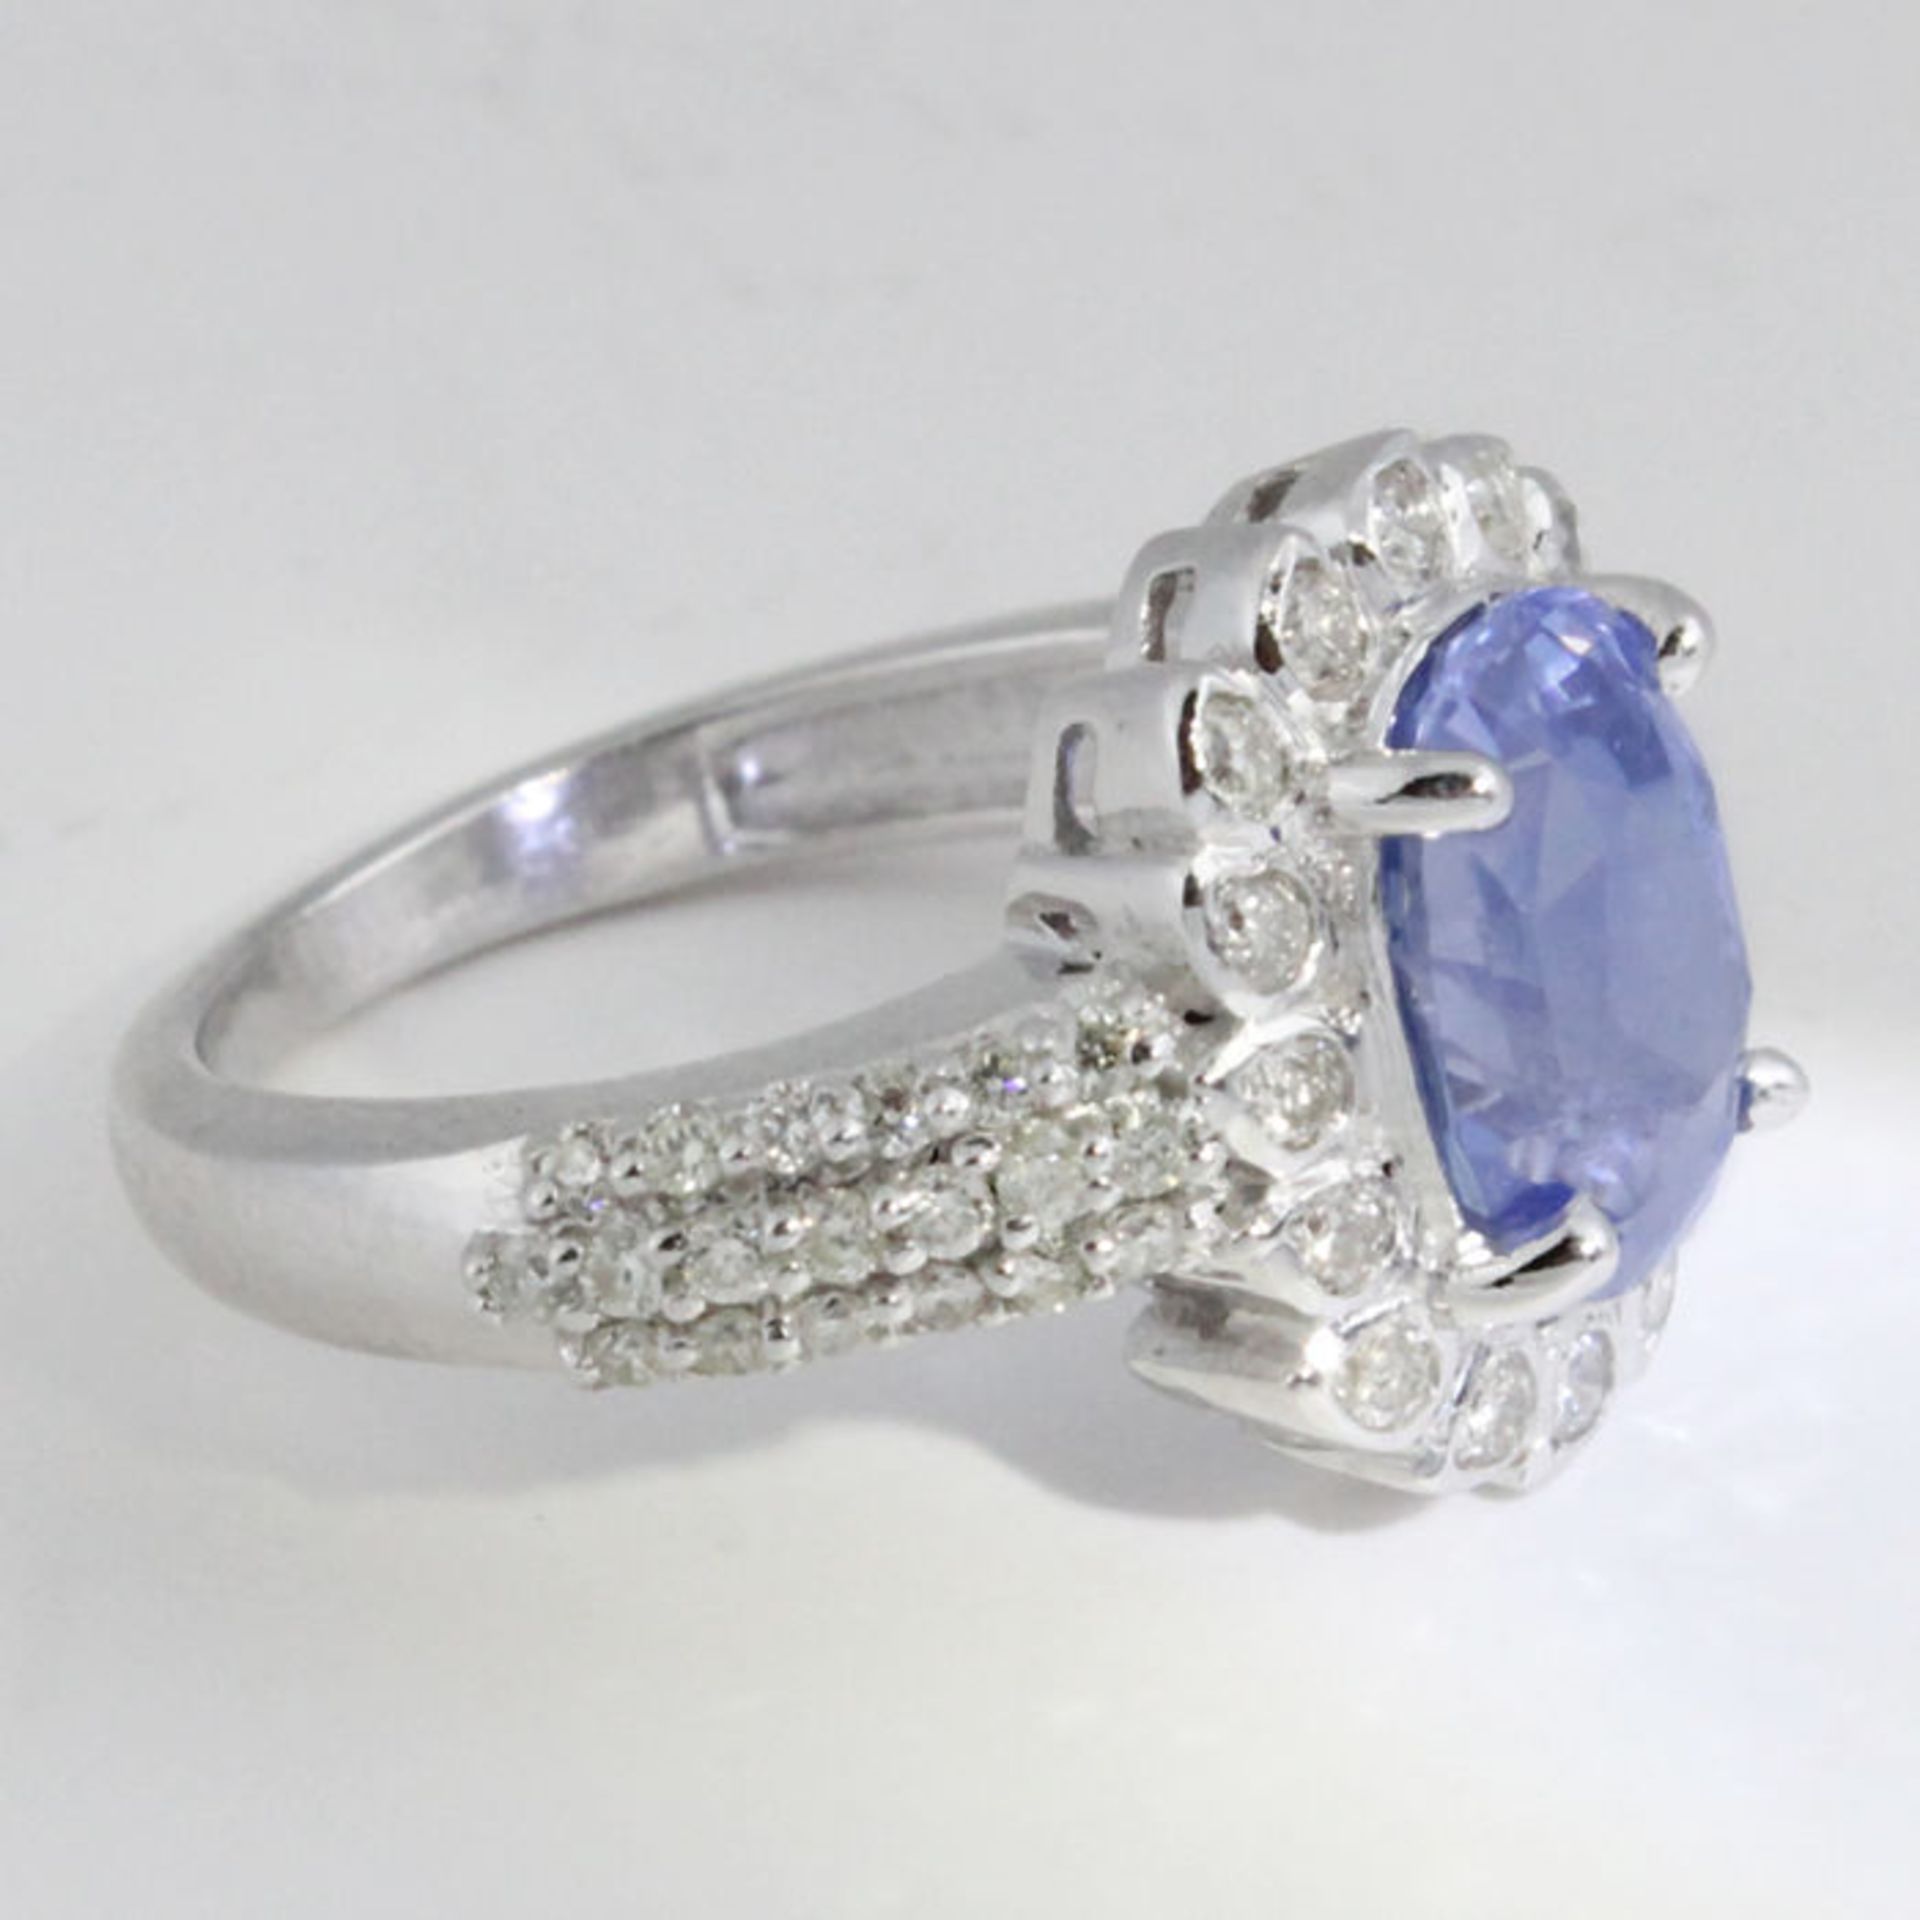 IGI Certified 14 K Very Exclusive Designer White Gold Blue Sapphire and Diamond Ring - Image 5 of 7